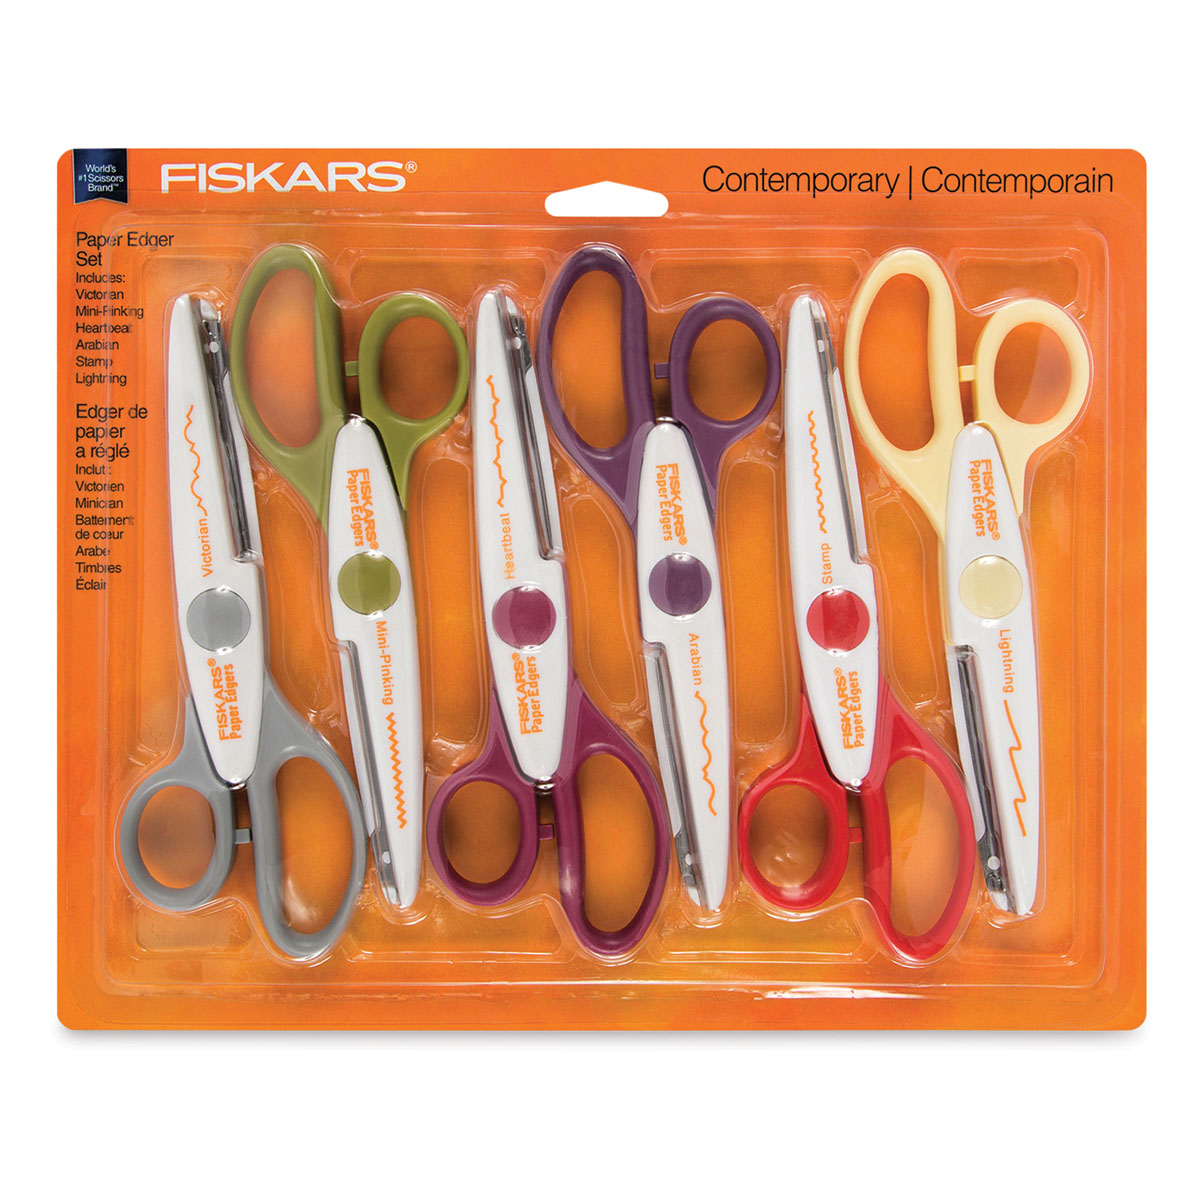 Fiskars paper scissors and paper edgers for crafting